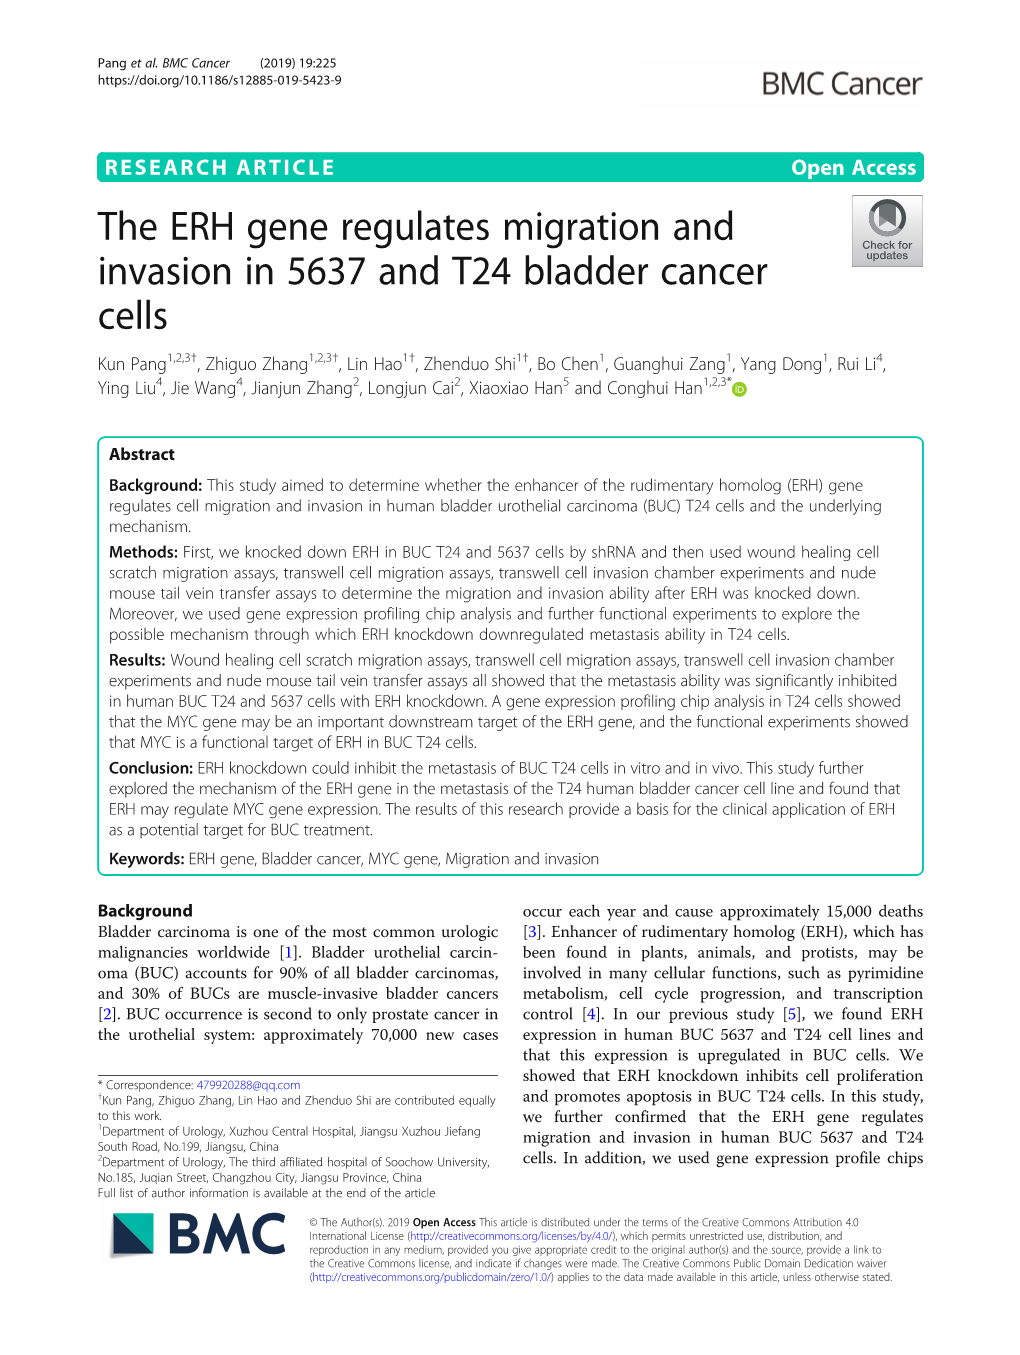 The ERH Gene Regulates Migration and Invasion in 5637 and T24